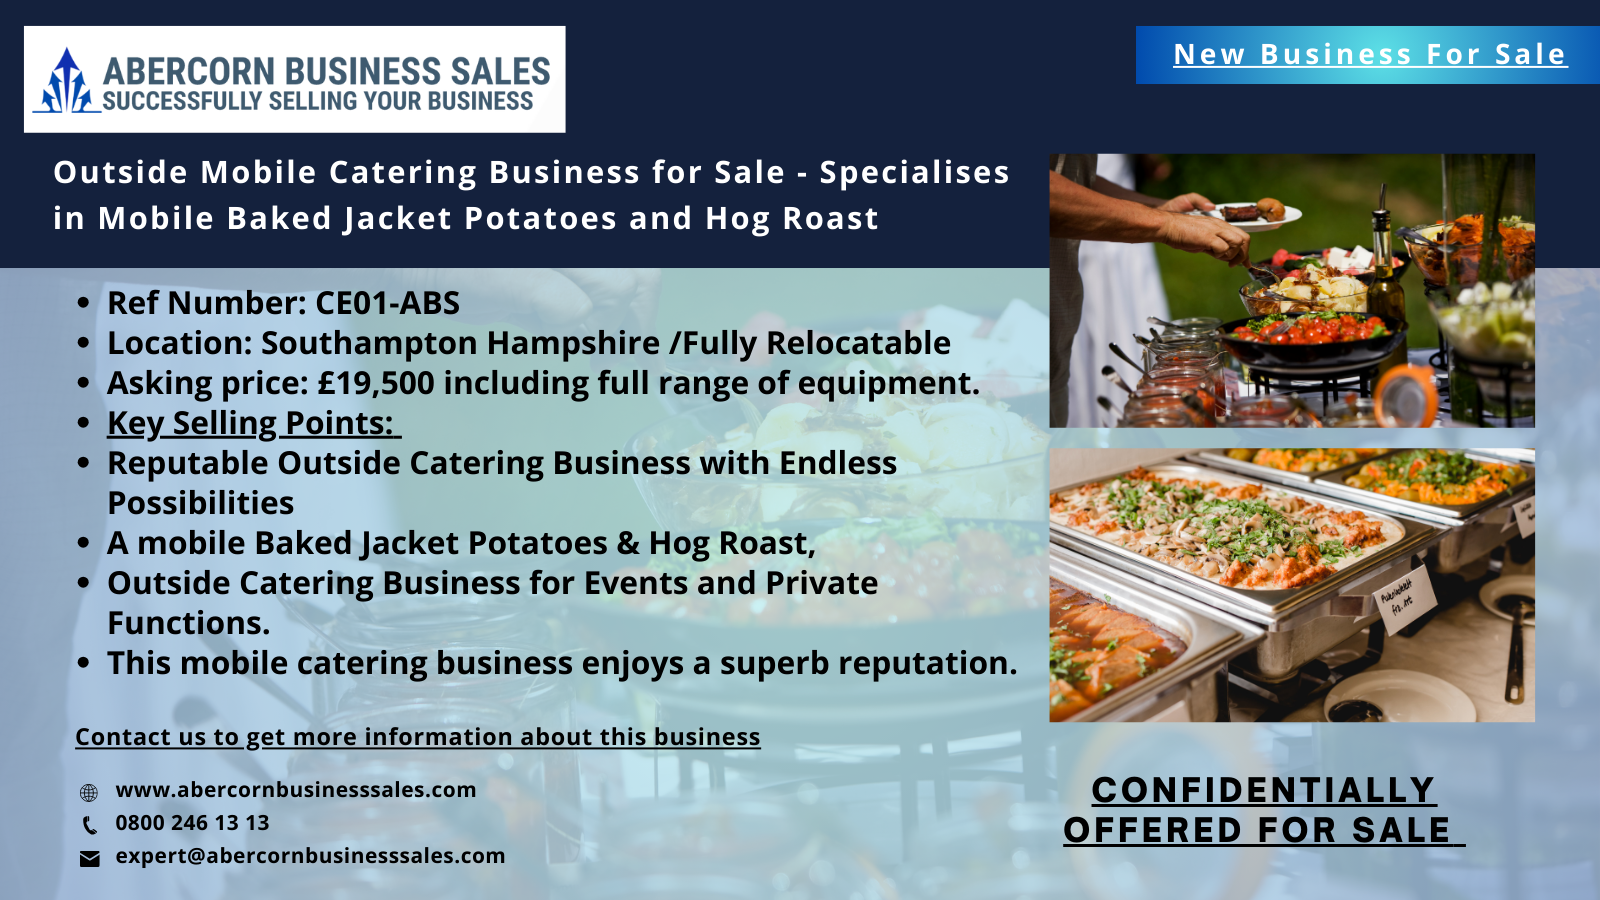 CE01-ABS - Outside Mobile Catering Business for Sale - Specialises in Mobile Baked Jacket Potatoes and Hog Roast